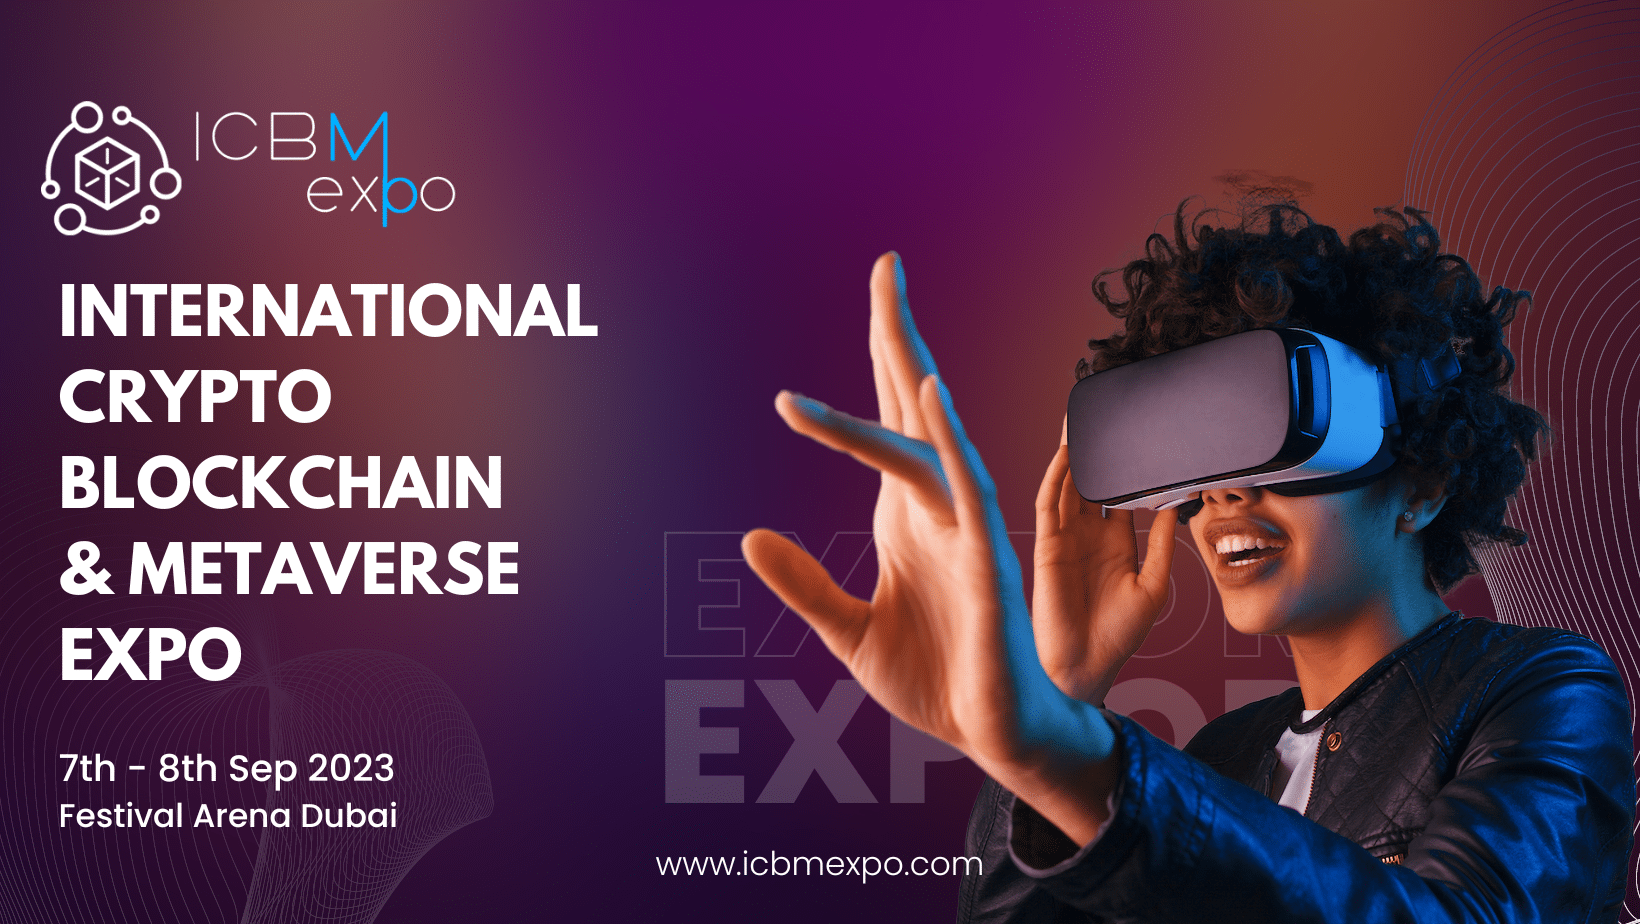 Don't Miss Out: Get Ready for International Crypto, Blockchain & Metaverse Expo 2023 (ICBM Expo)